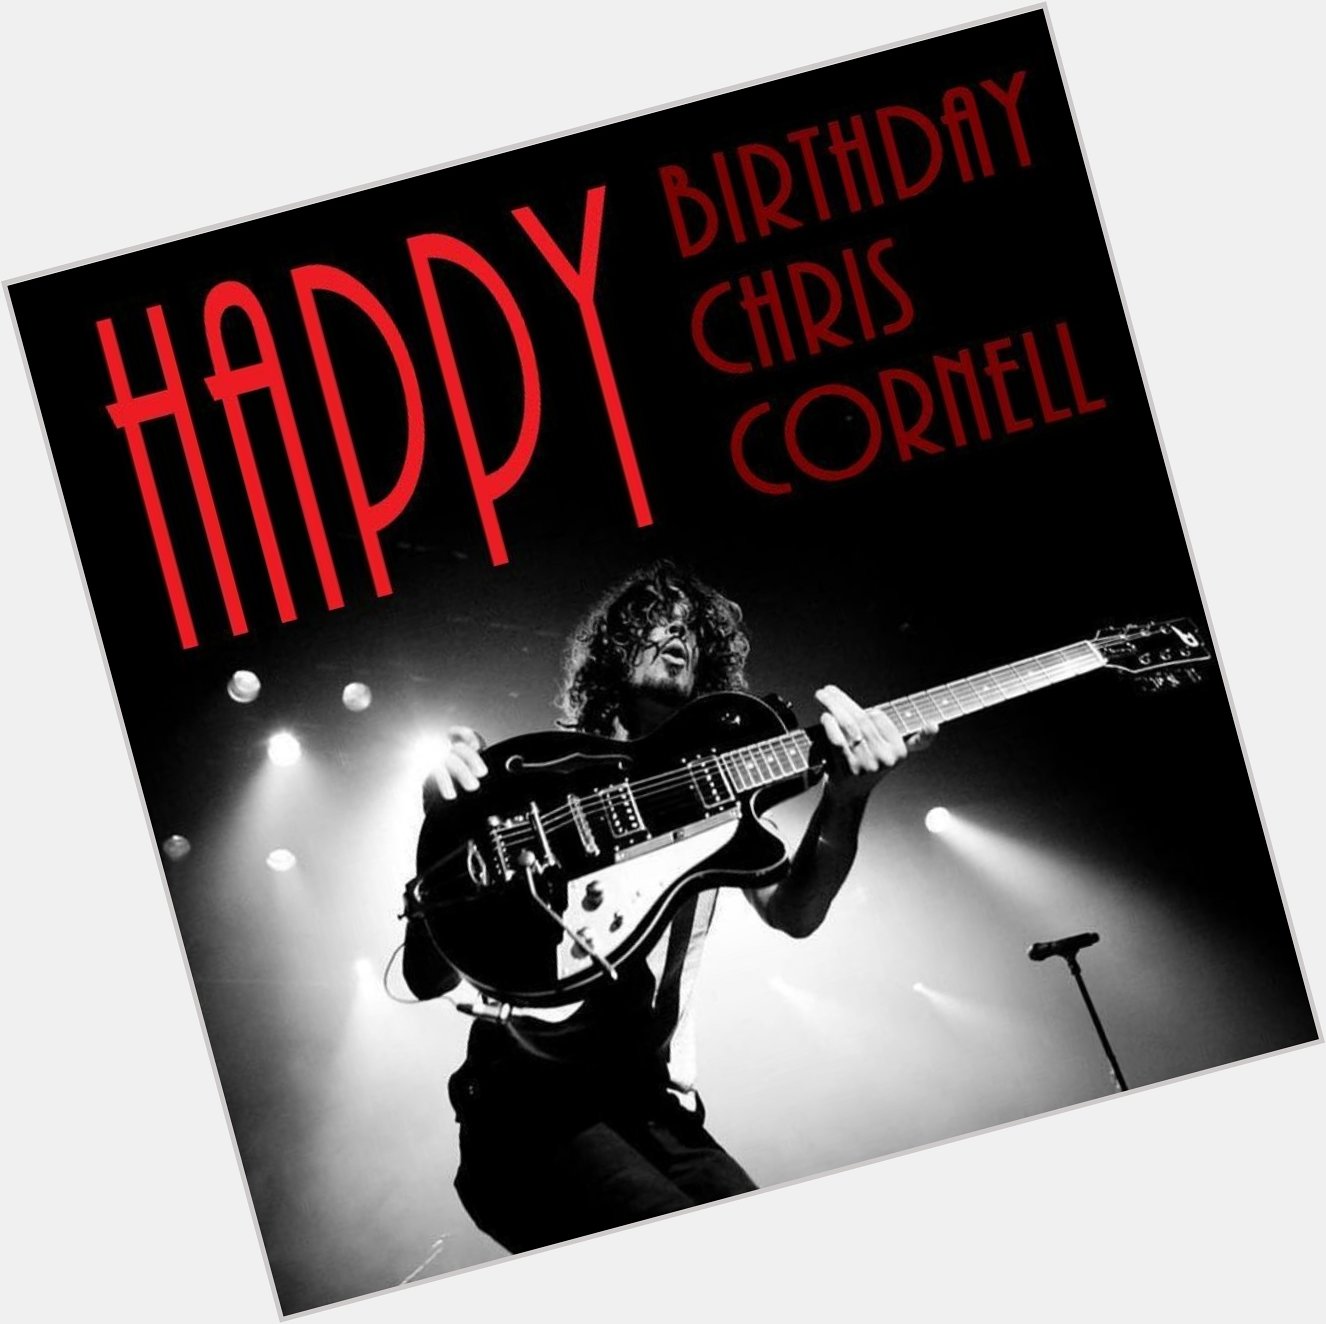 Happy Birthday Chris Cornell. Hope everything is better where you are 